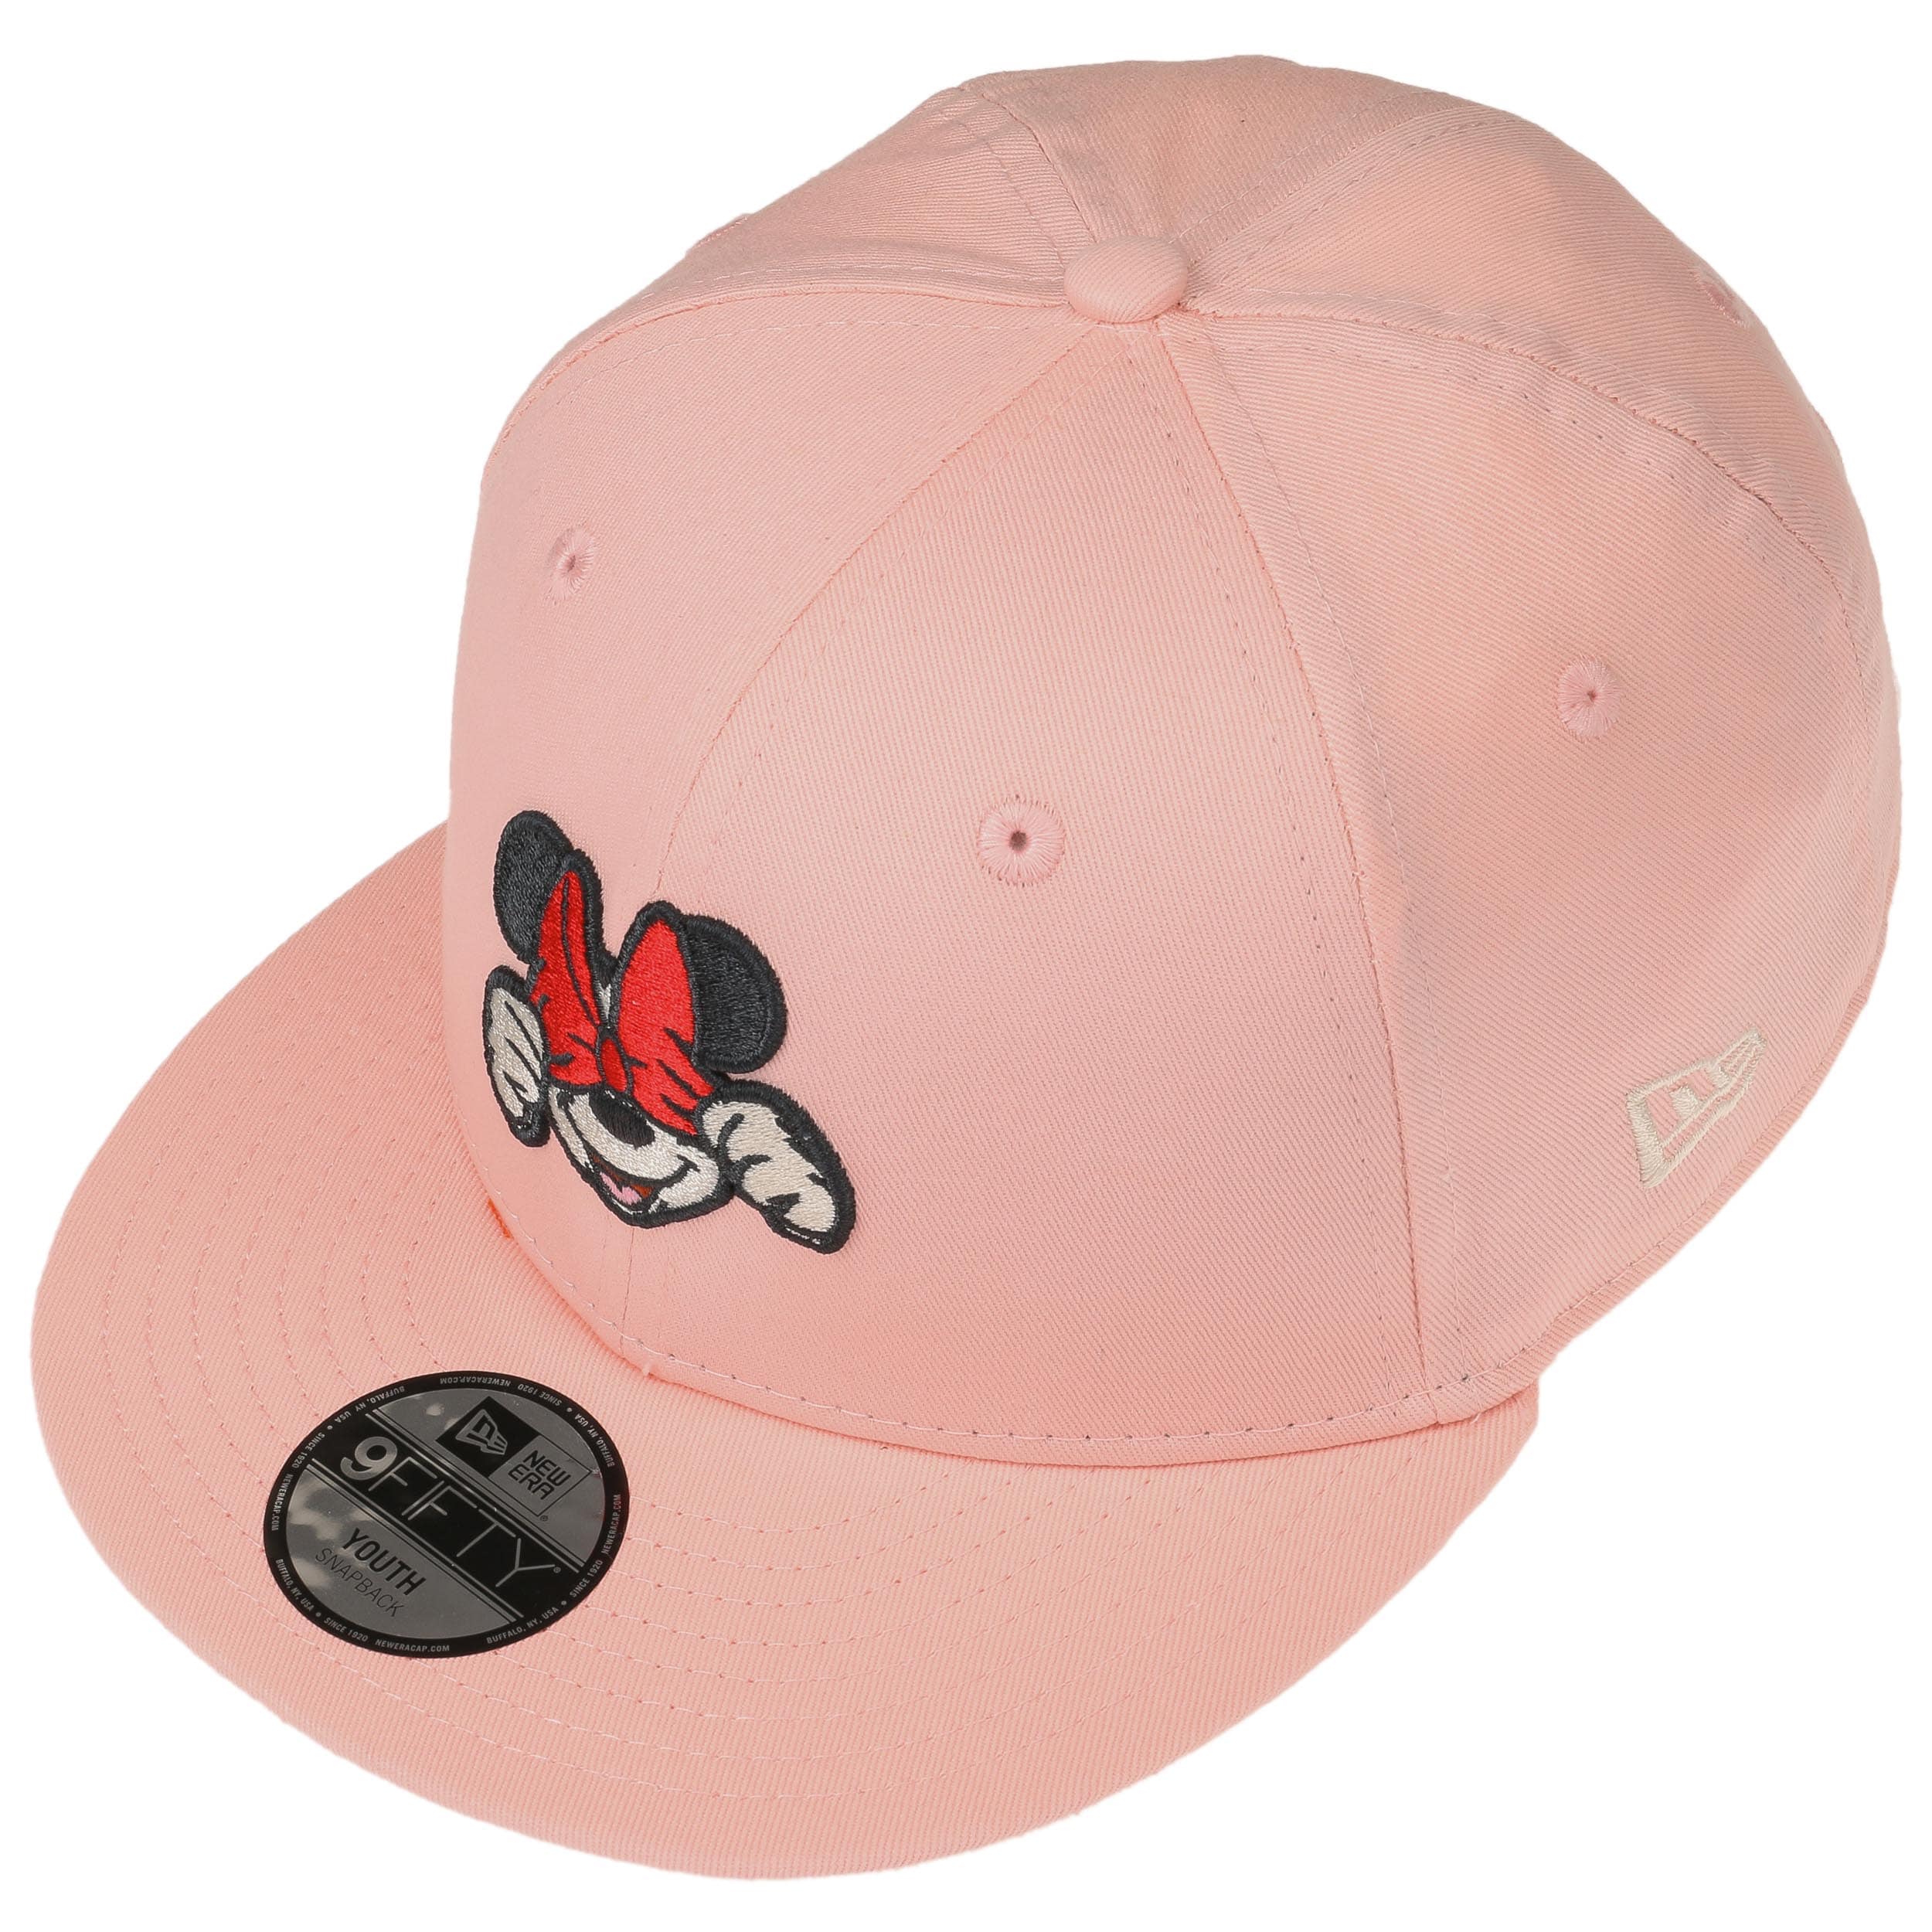 Era Kindercap Mouse - New by 9Fifty Minnie 24,95 €